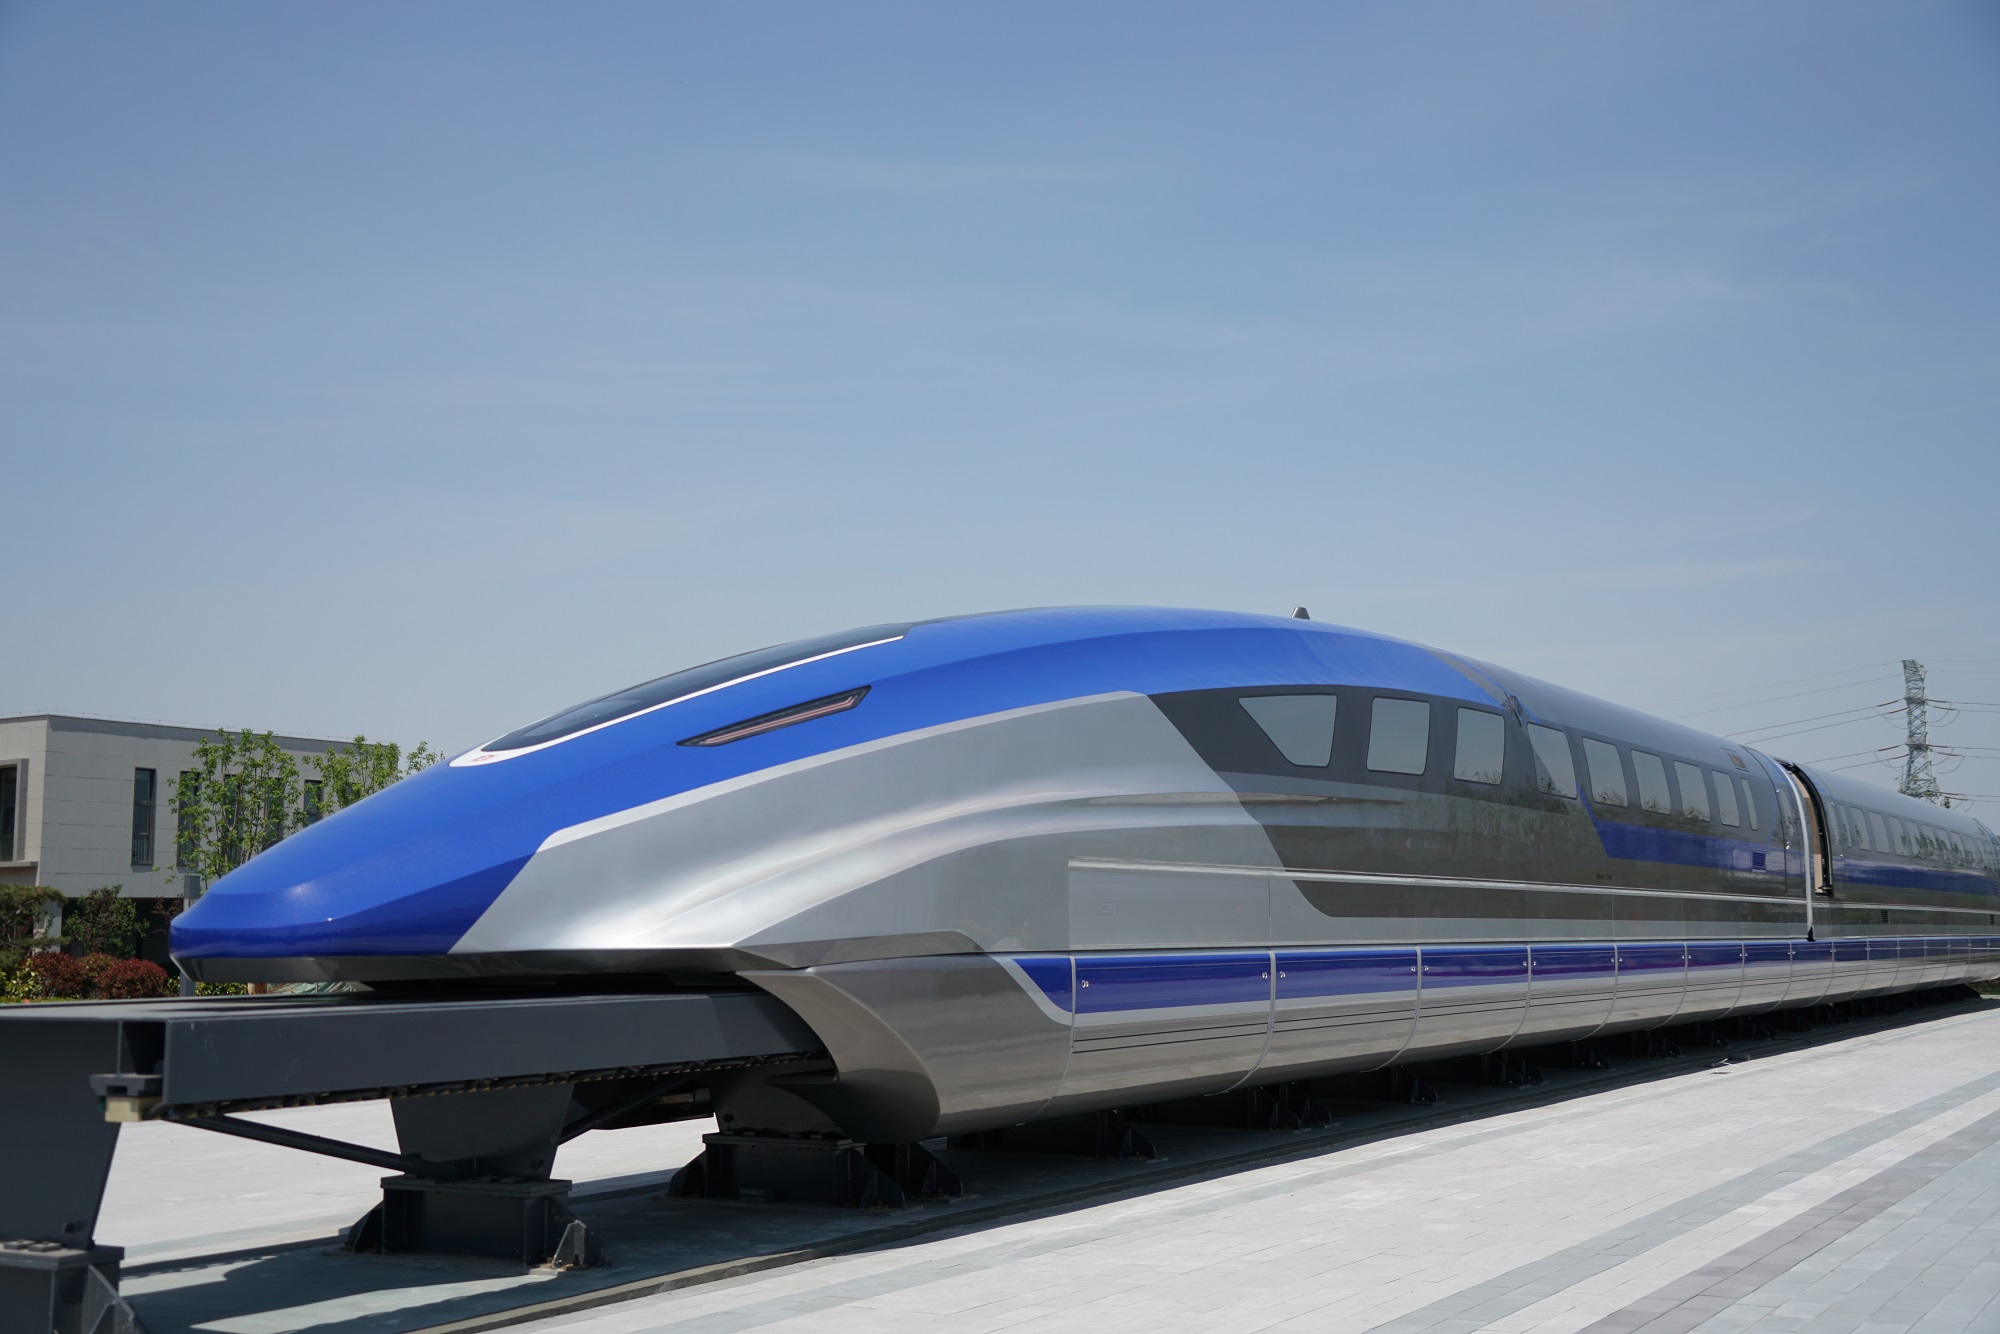 Test Prototype of 600km/h high-speed maglev train rolls off production line in China